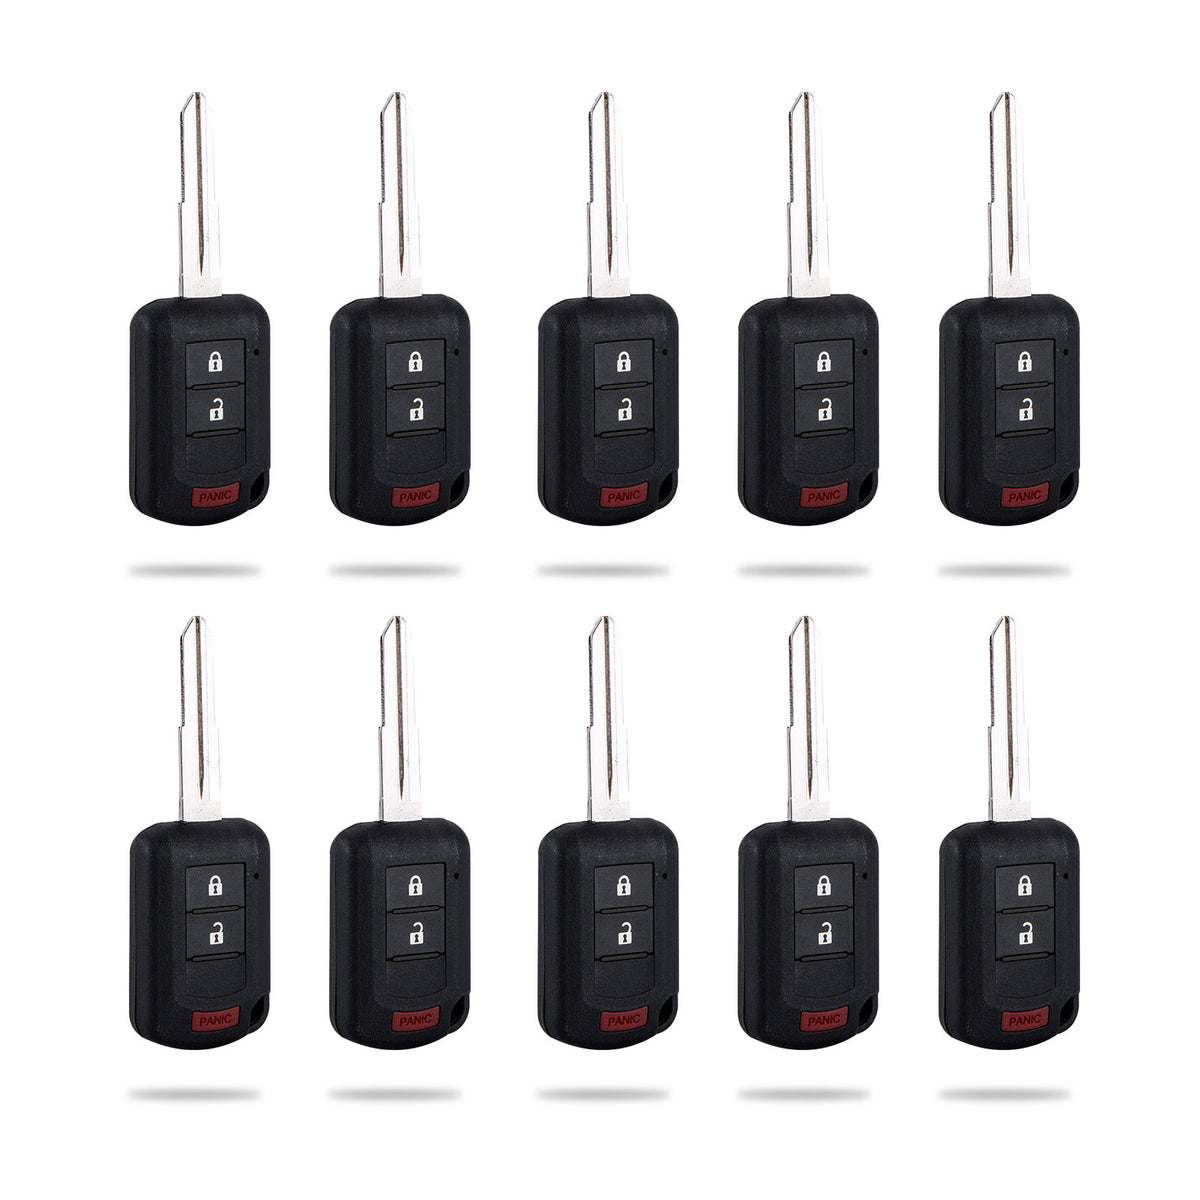 Lots of 10 Remote Key Fob Replacement for Mitsubishi Mirage Lancer Outlander RVR OUCJ166N 850G-J166N 3 Button